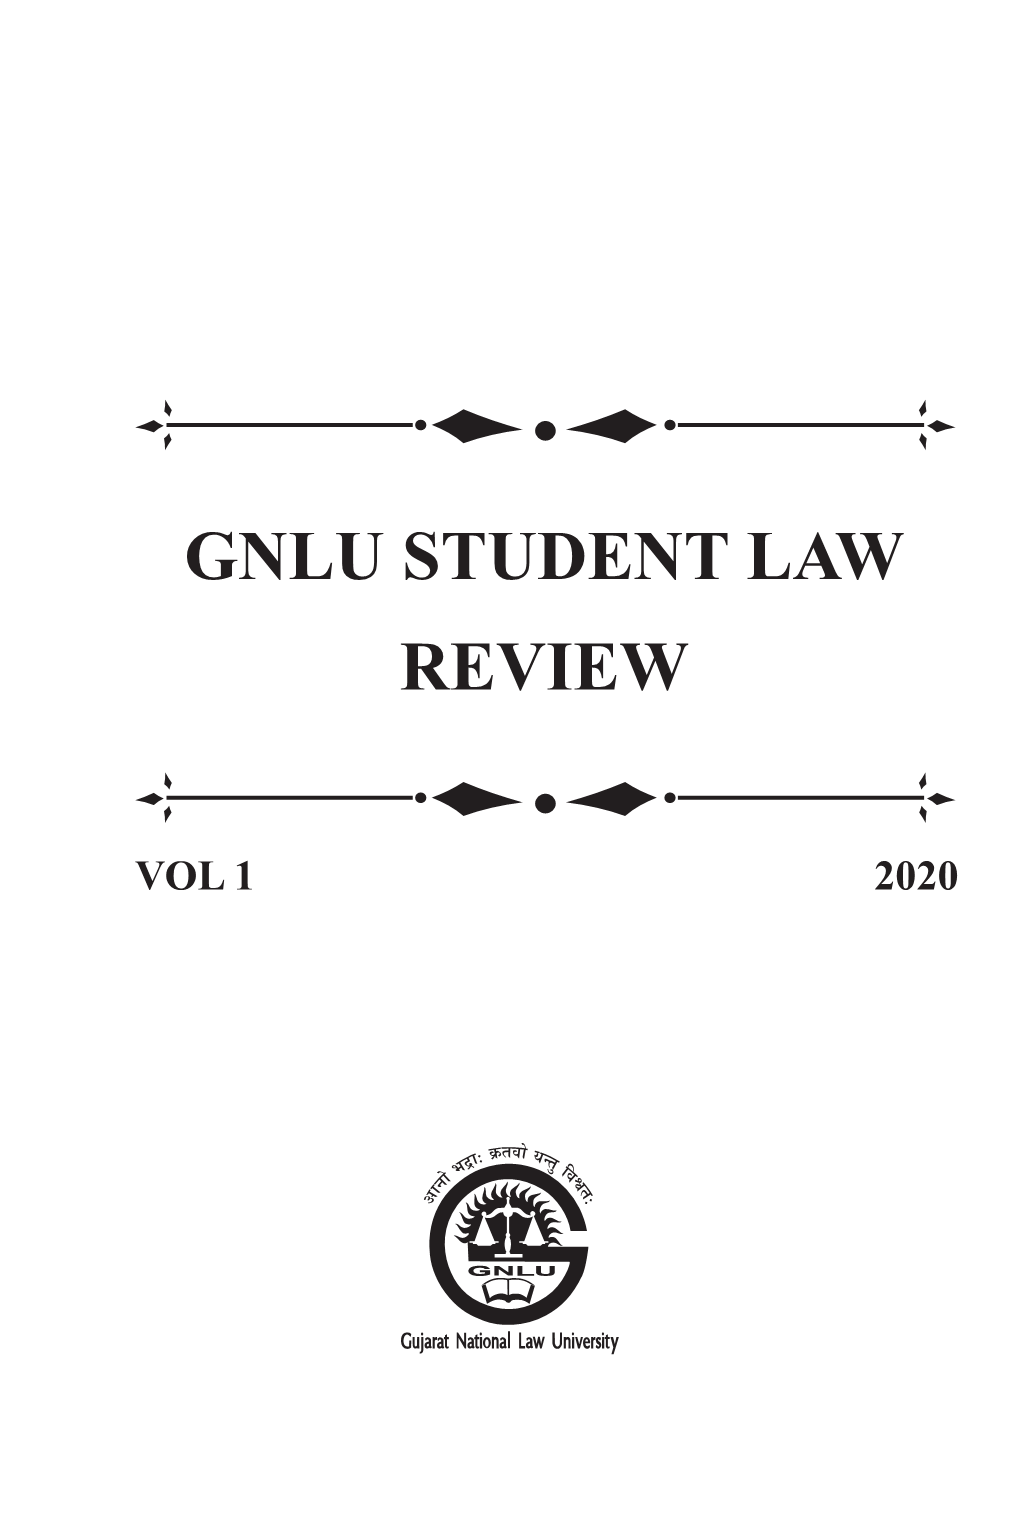 Volume I Gnlus Tudent Law Review 2020